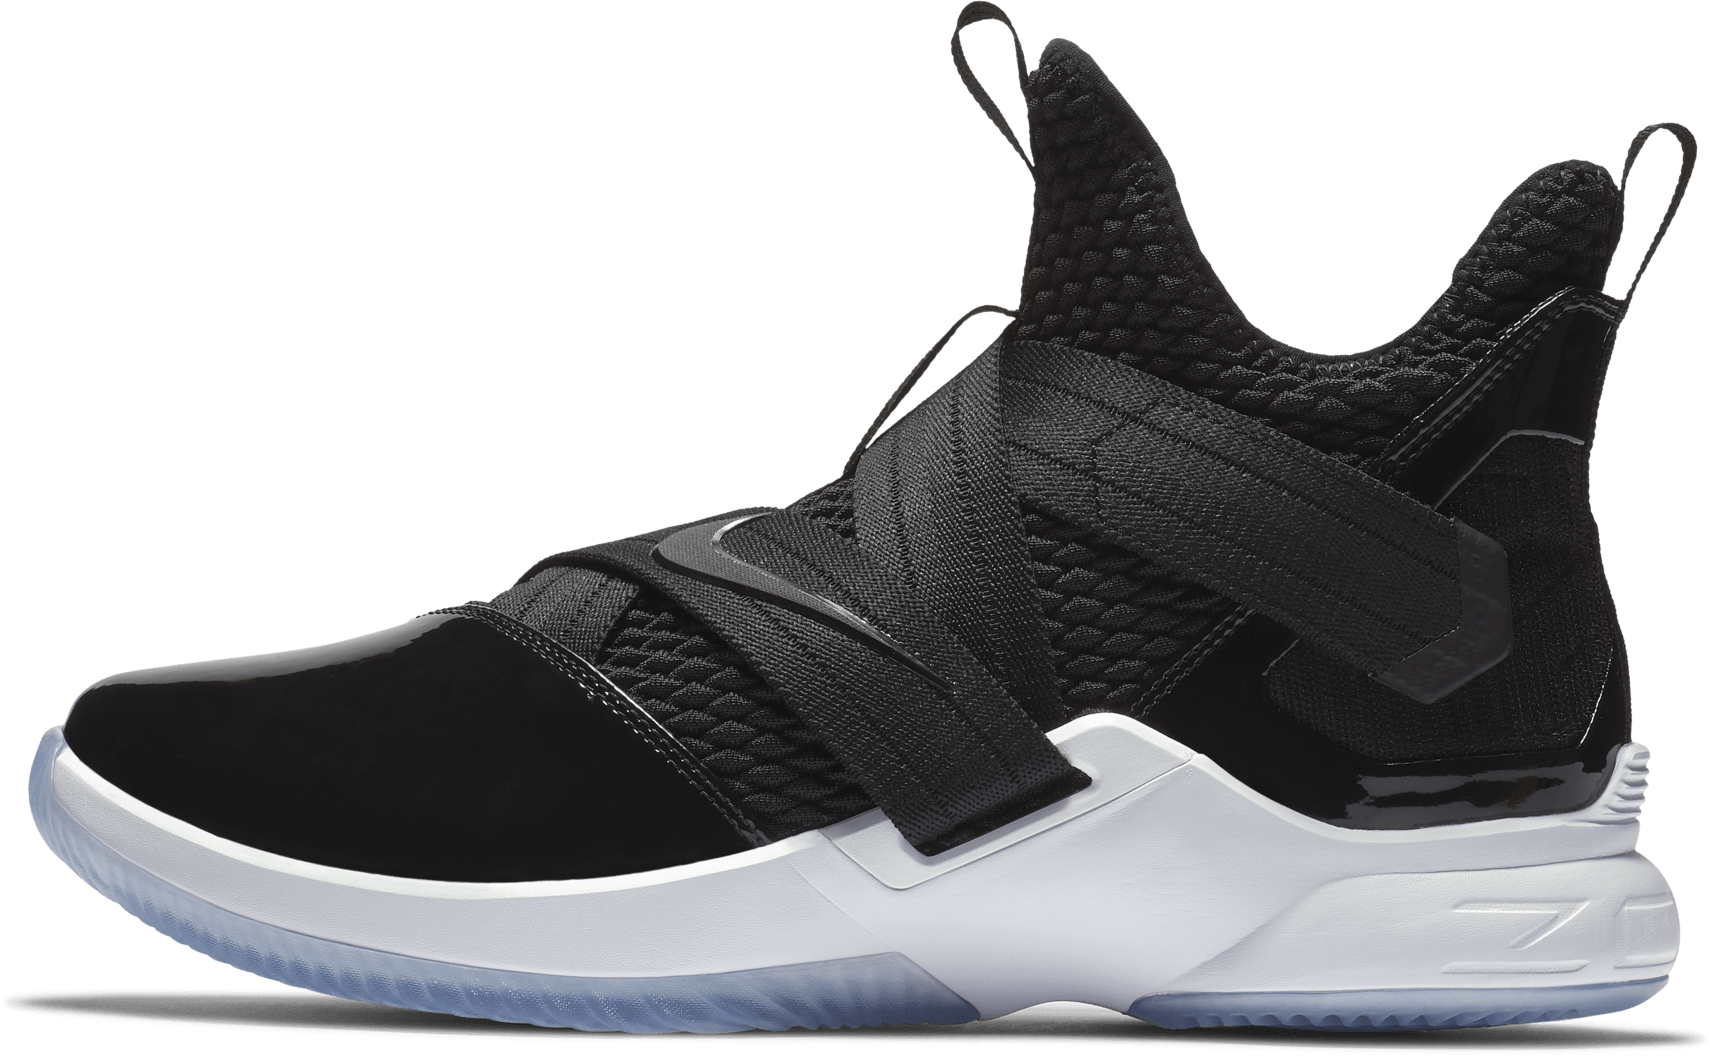 Nike Lebron Soldier 12 Performance Review